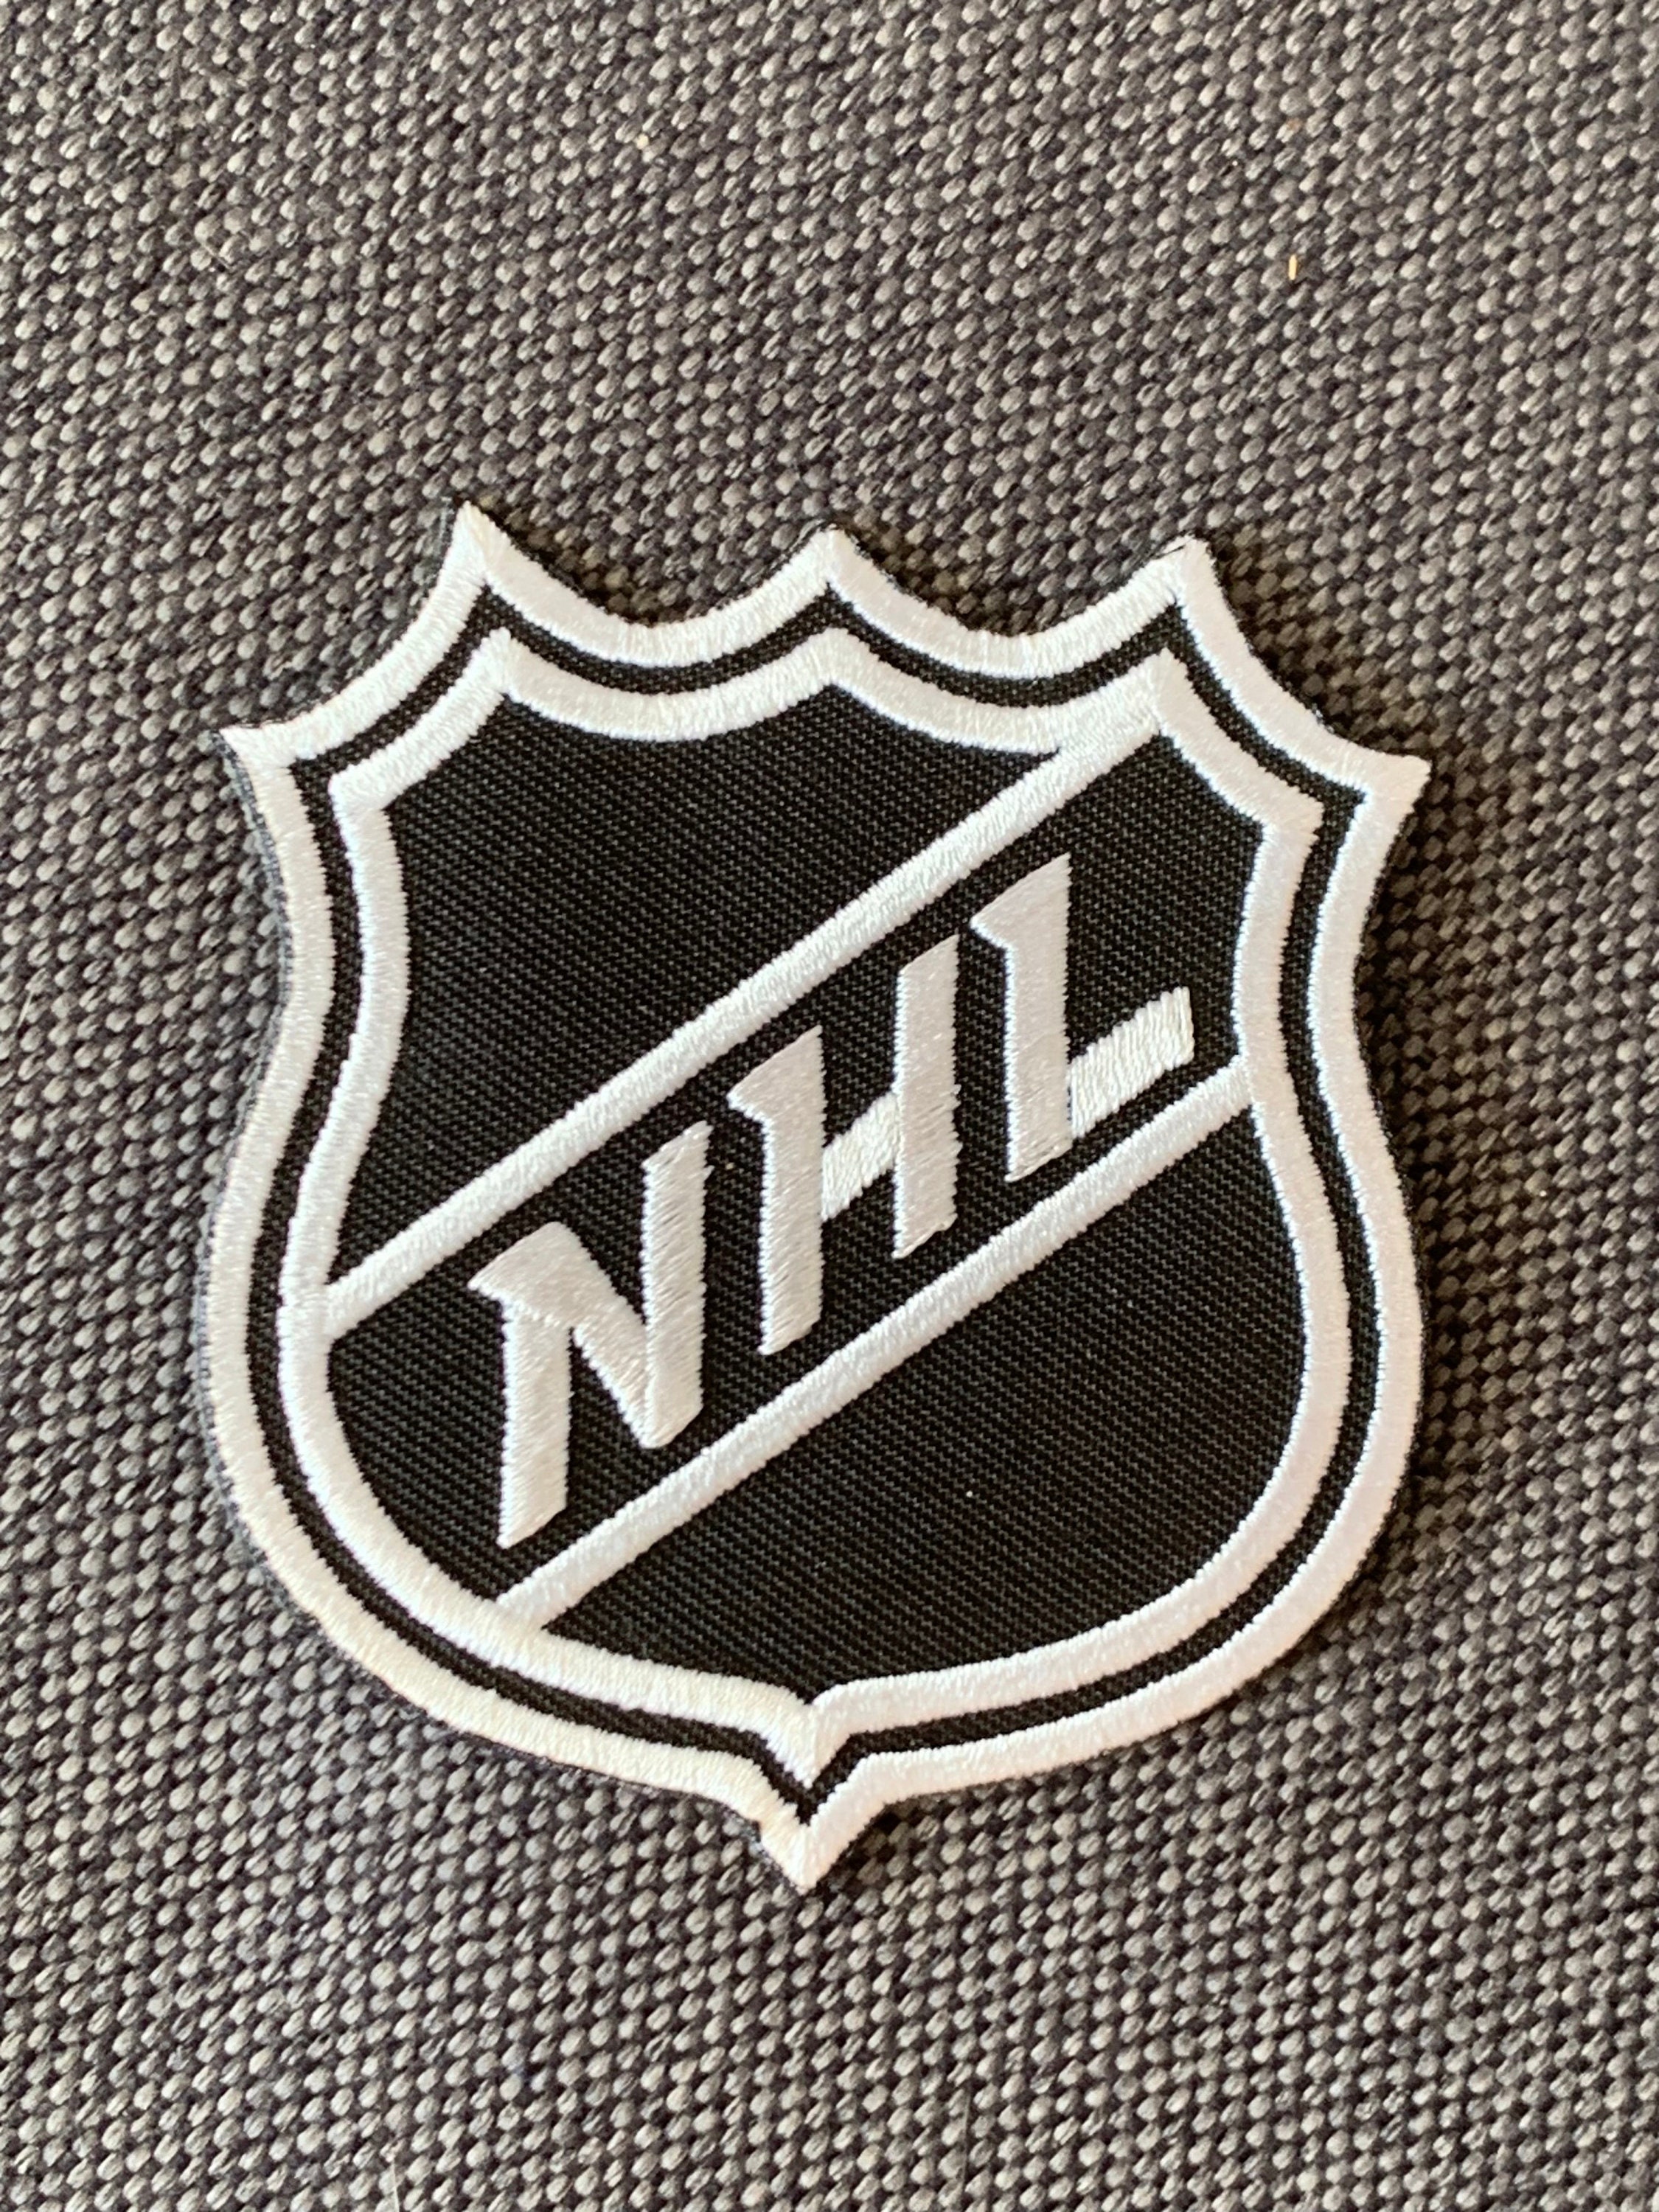 NHL Team New York Islanders Iron/Sew On Embroidered Badge Patch Set Of 2  Brand